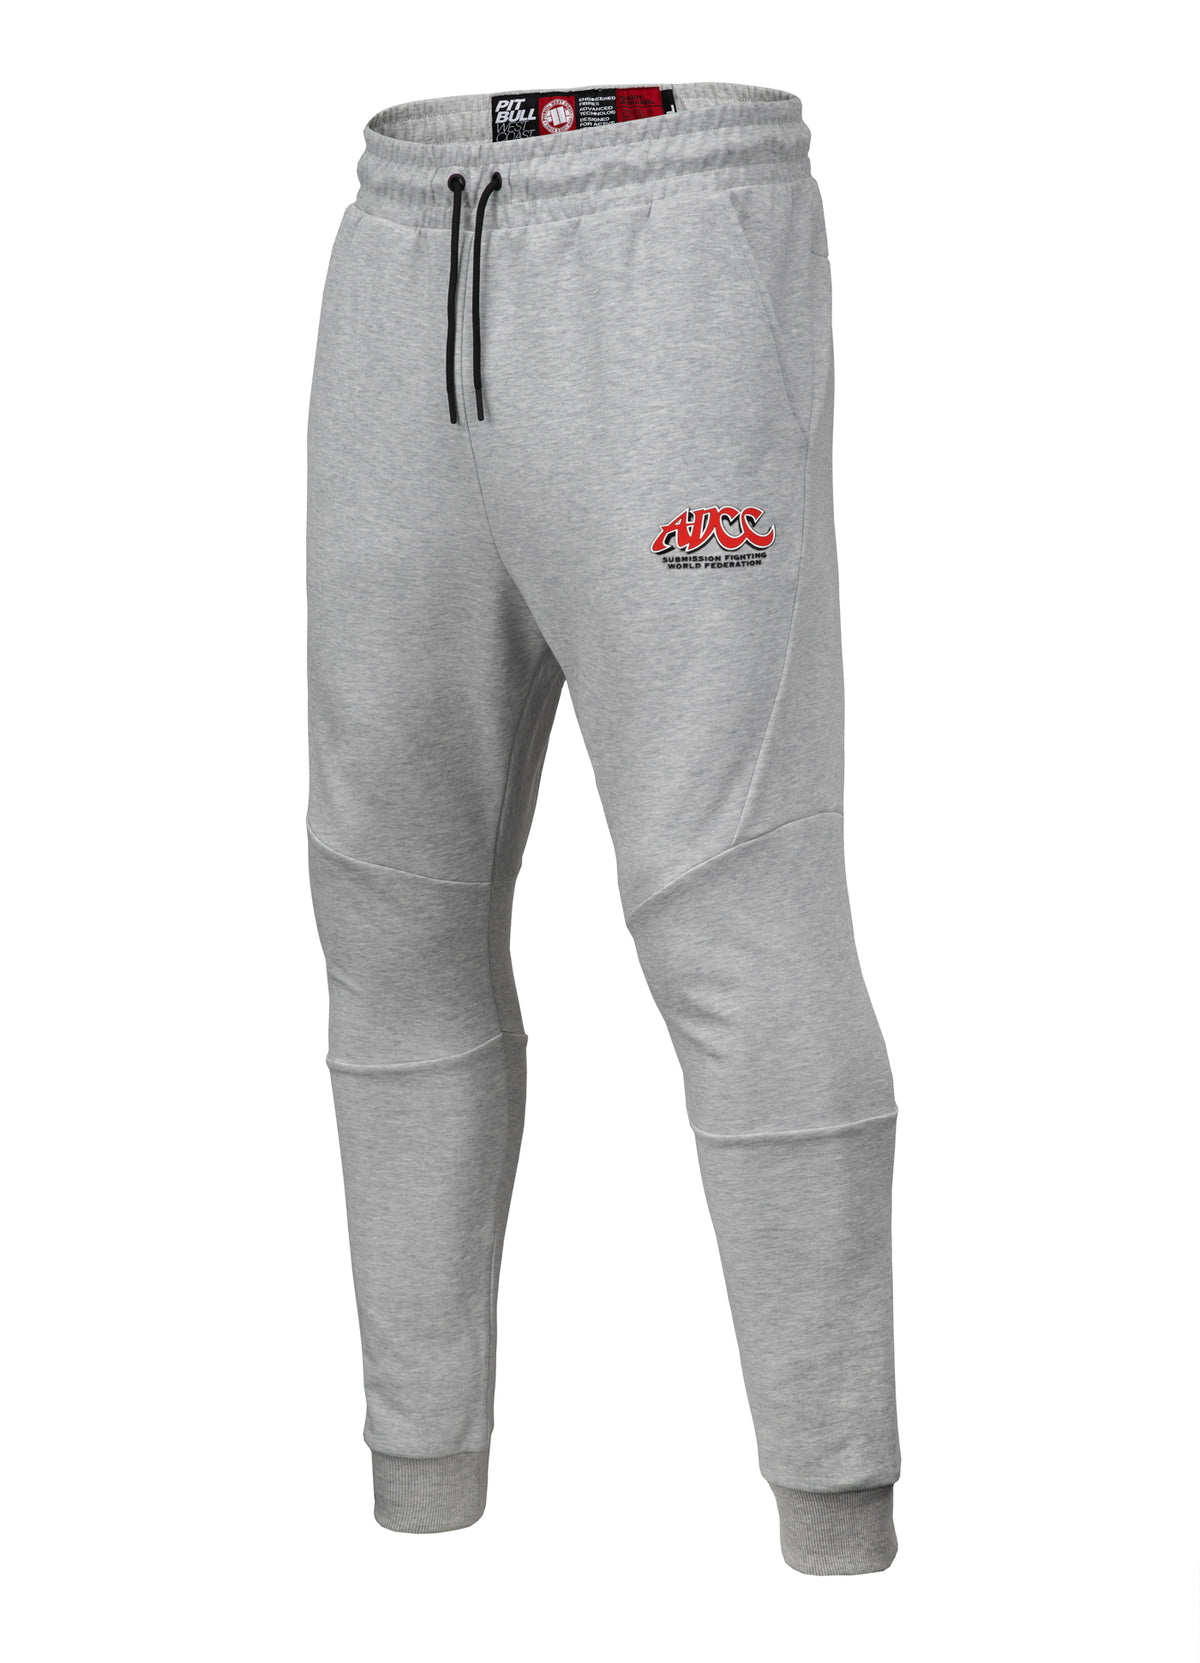 ADCC Grey Joggers.